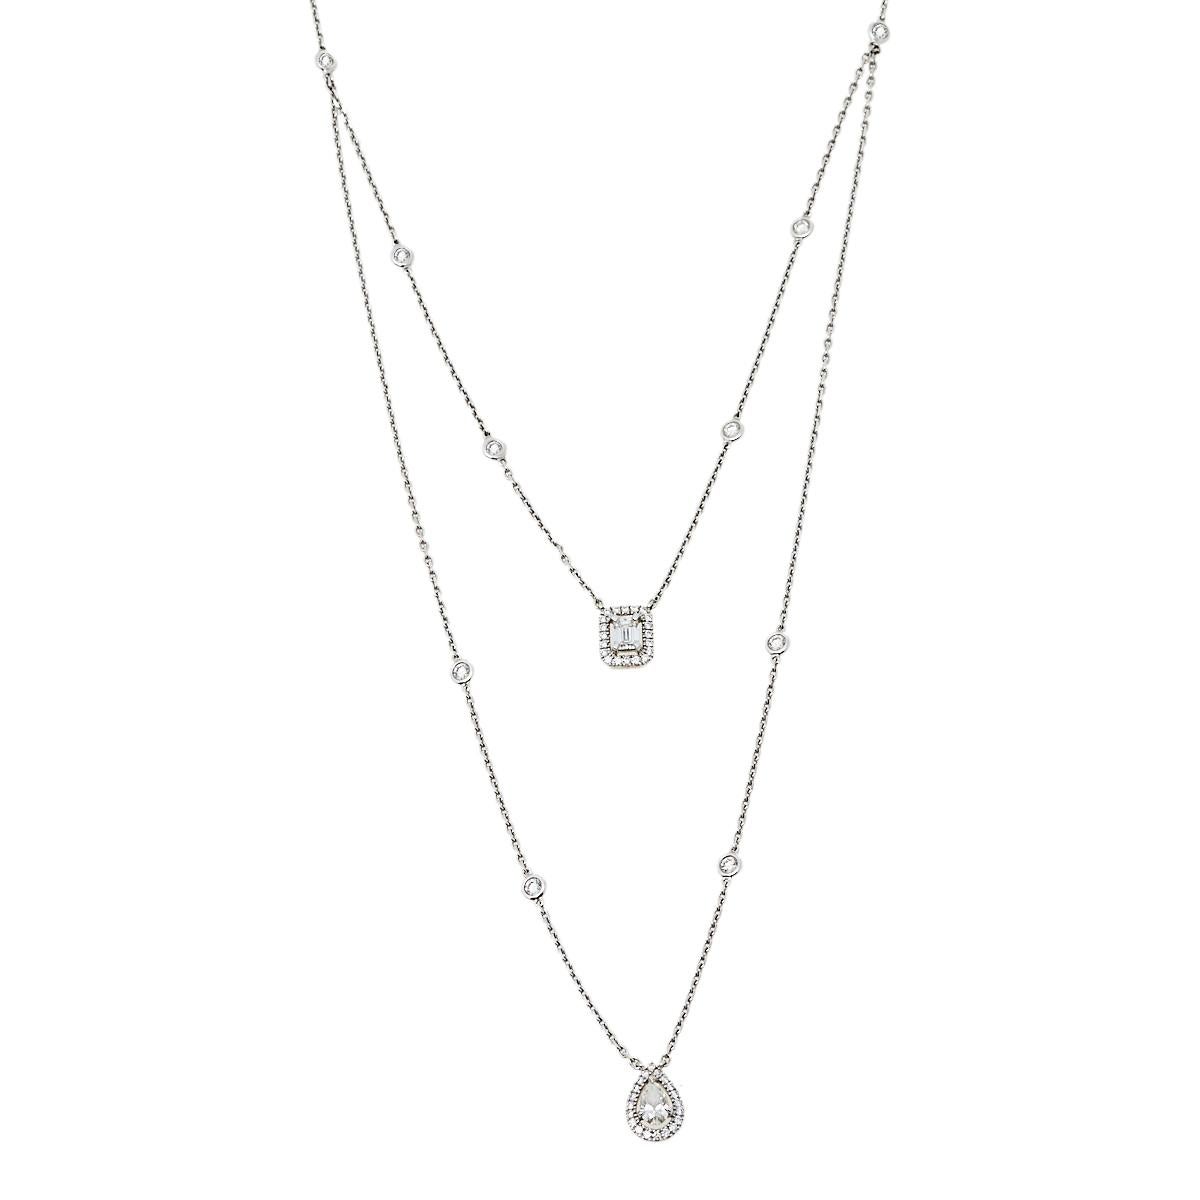 Beautiful and feminine, this ethereal necklace from Messika is a statement piece that is designed to complement a variety of your ensembles. Addressing the brand's chic taste and refined aesthetics, this beautiful creation is a striking combination